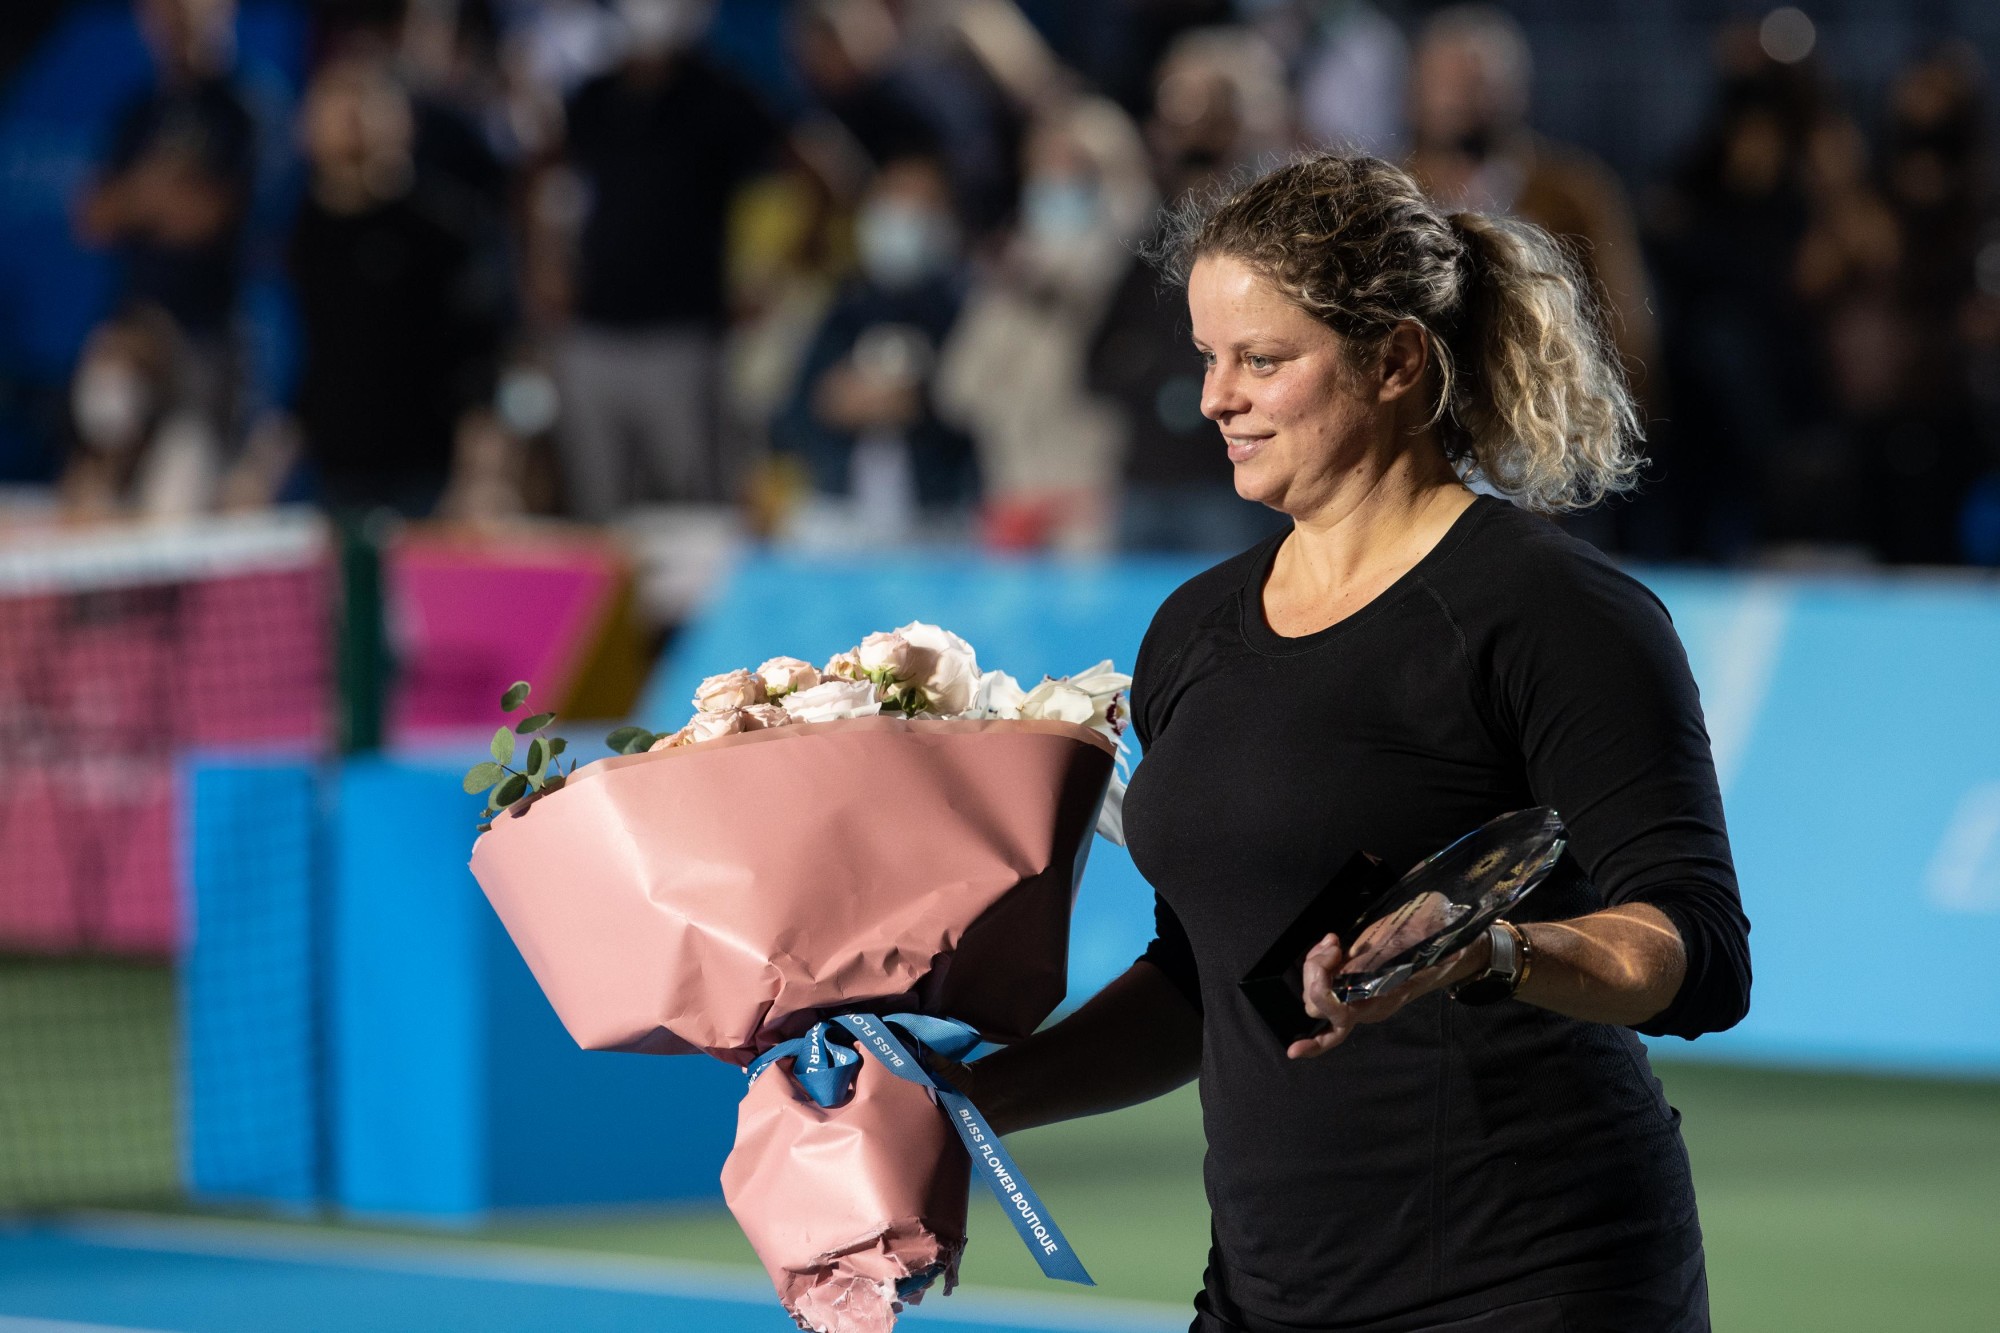 Tennis legend and Women’s Singles Exhibition Game winner Kim Clijsters during Expo 2020 Dubai Tennis Week at the Expo Sports Arena Web Image m52528